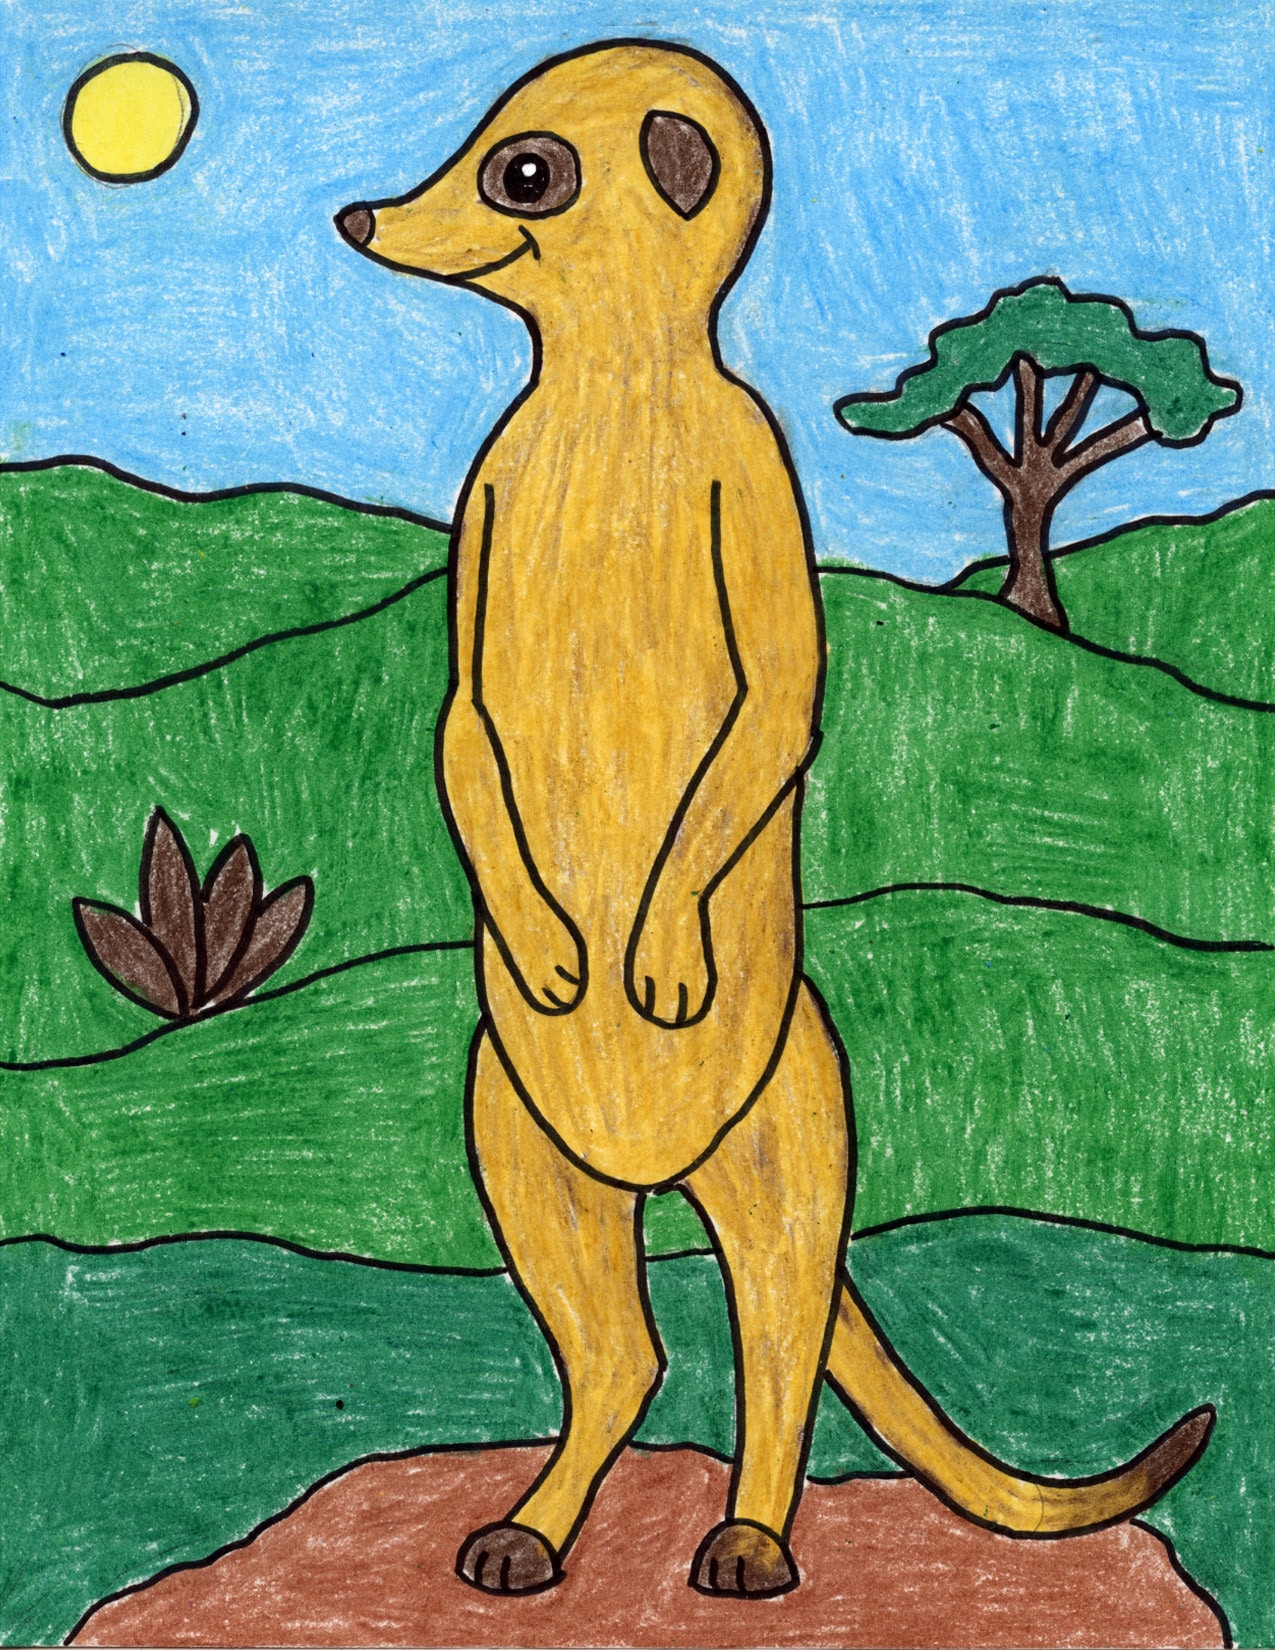 Easy How to Draw a Meerkat Tutorial and Meerkat Coloring Page